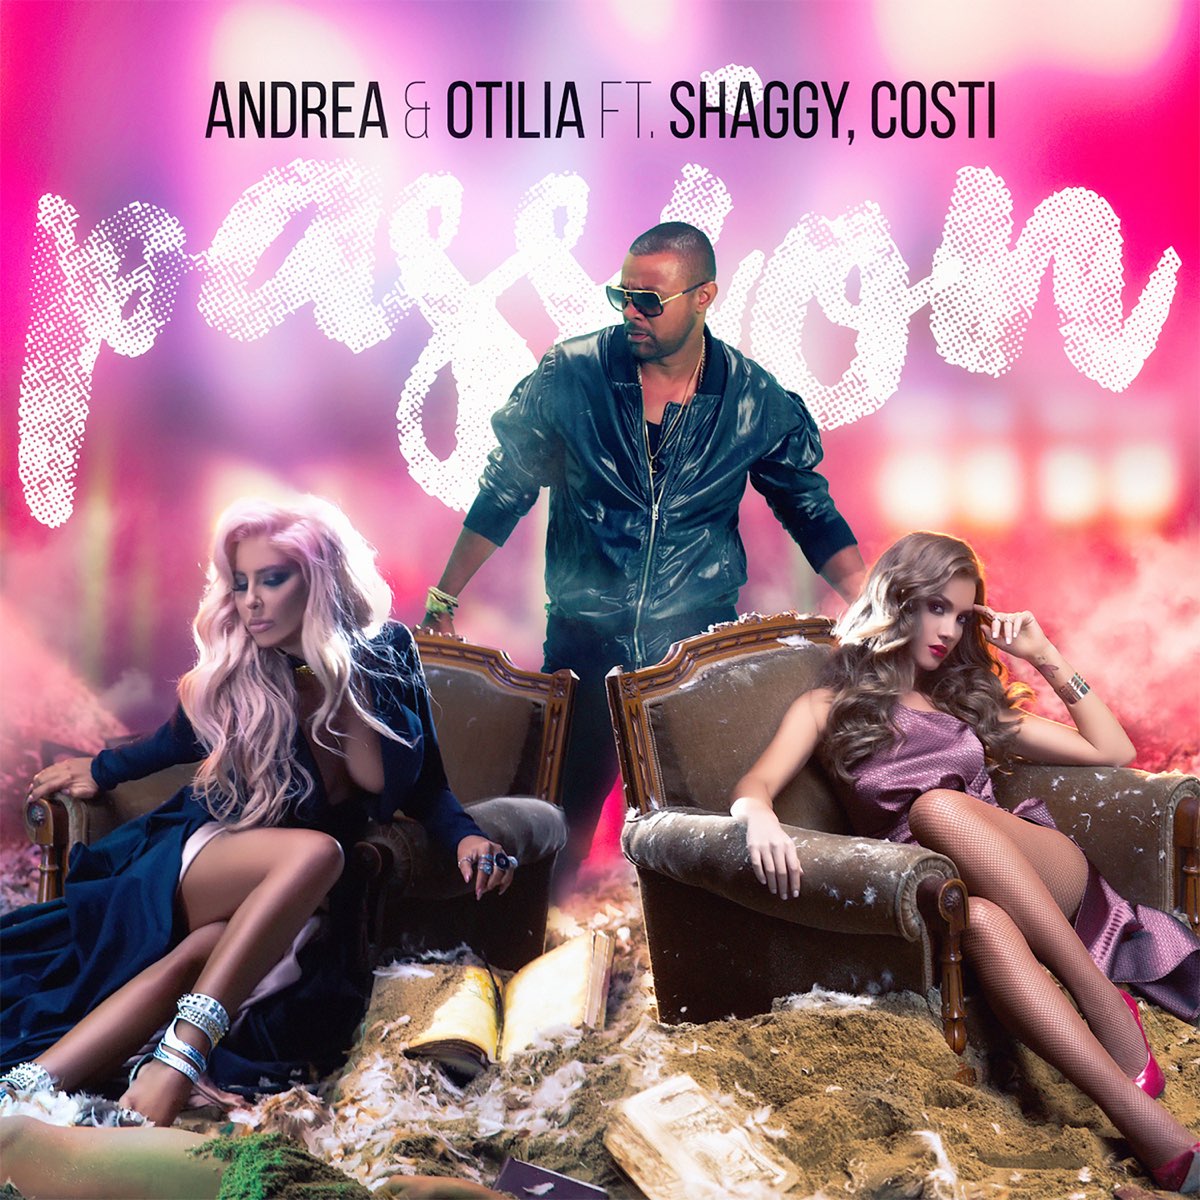 Passion (feat. Shaggy & Costi) by Andrea & Otilia on Apple Music